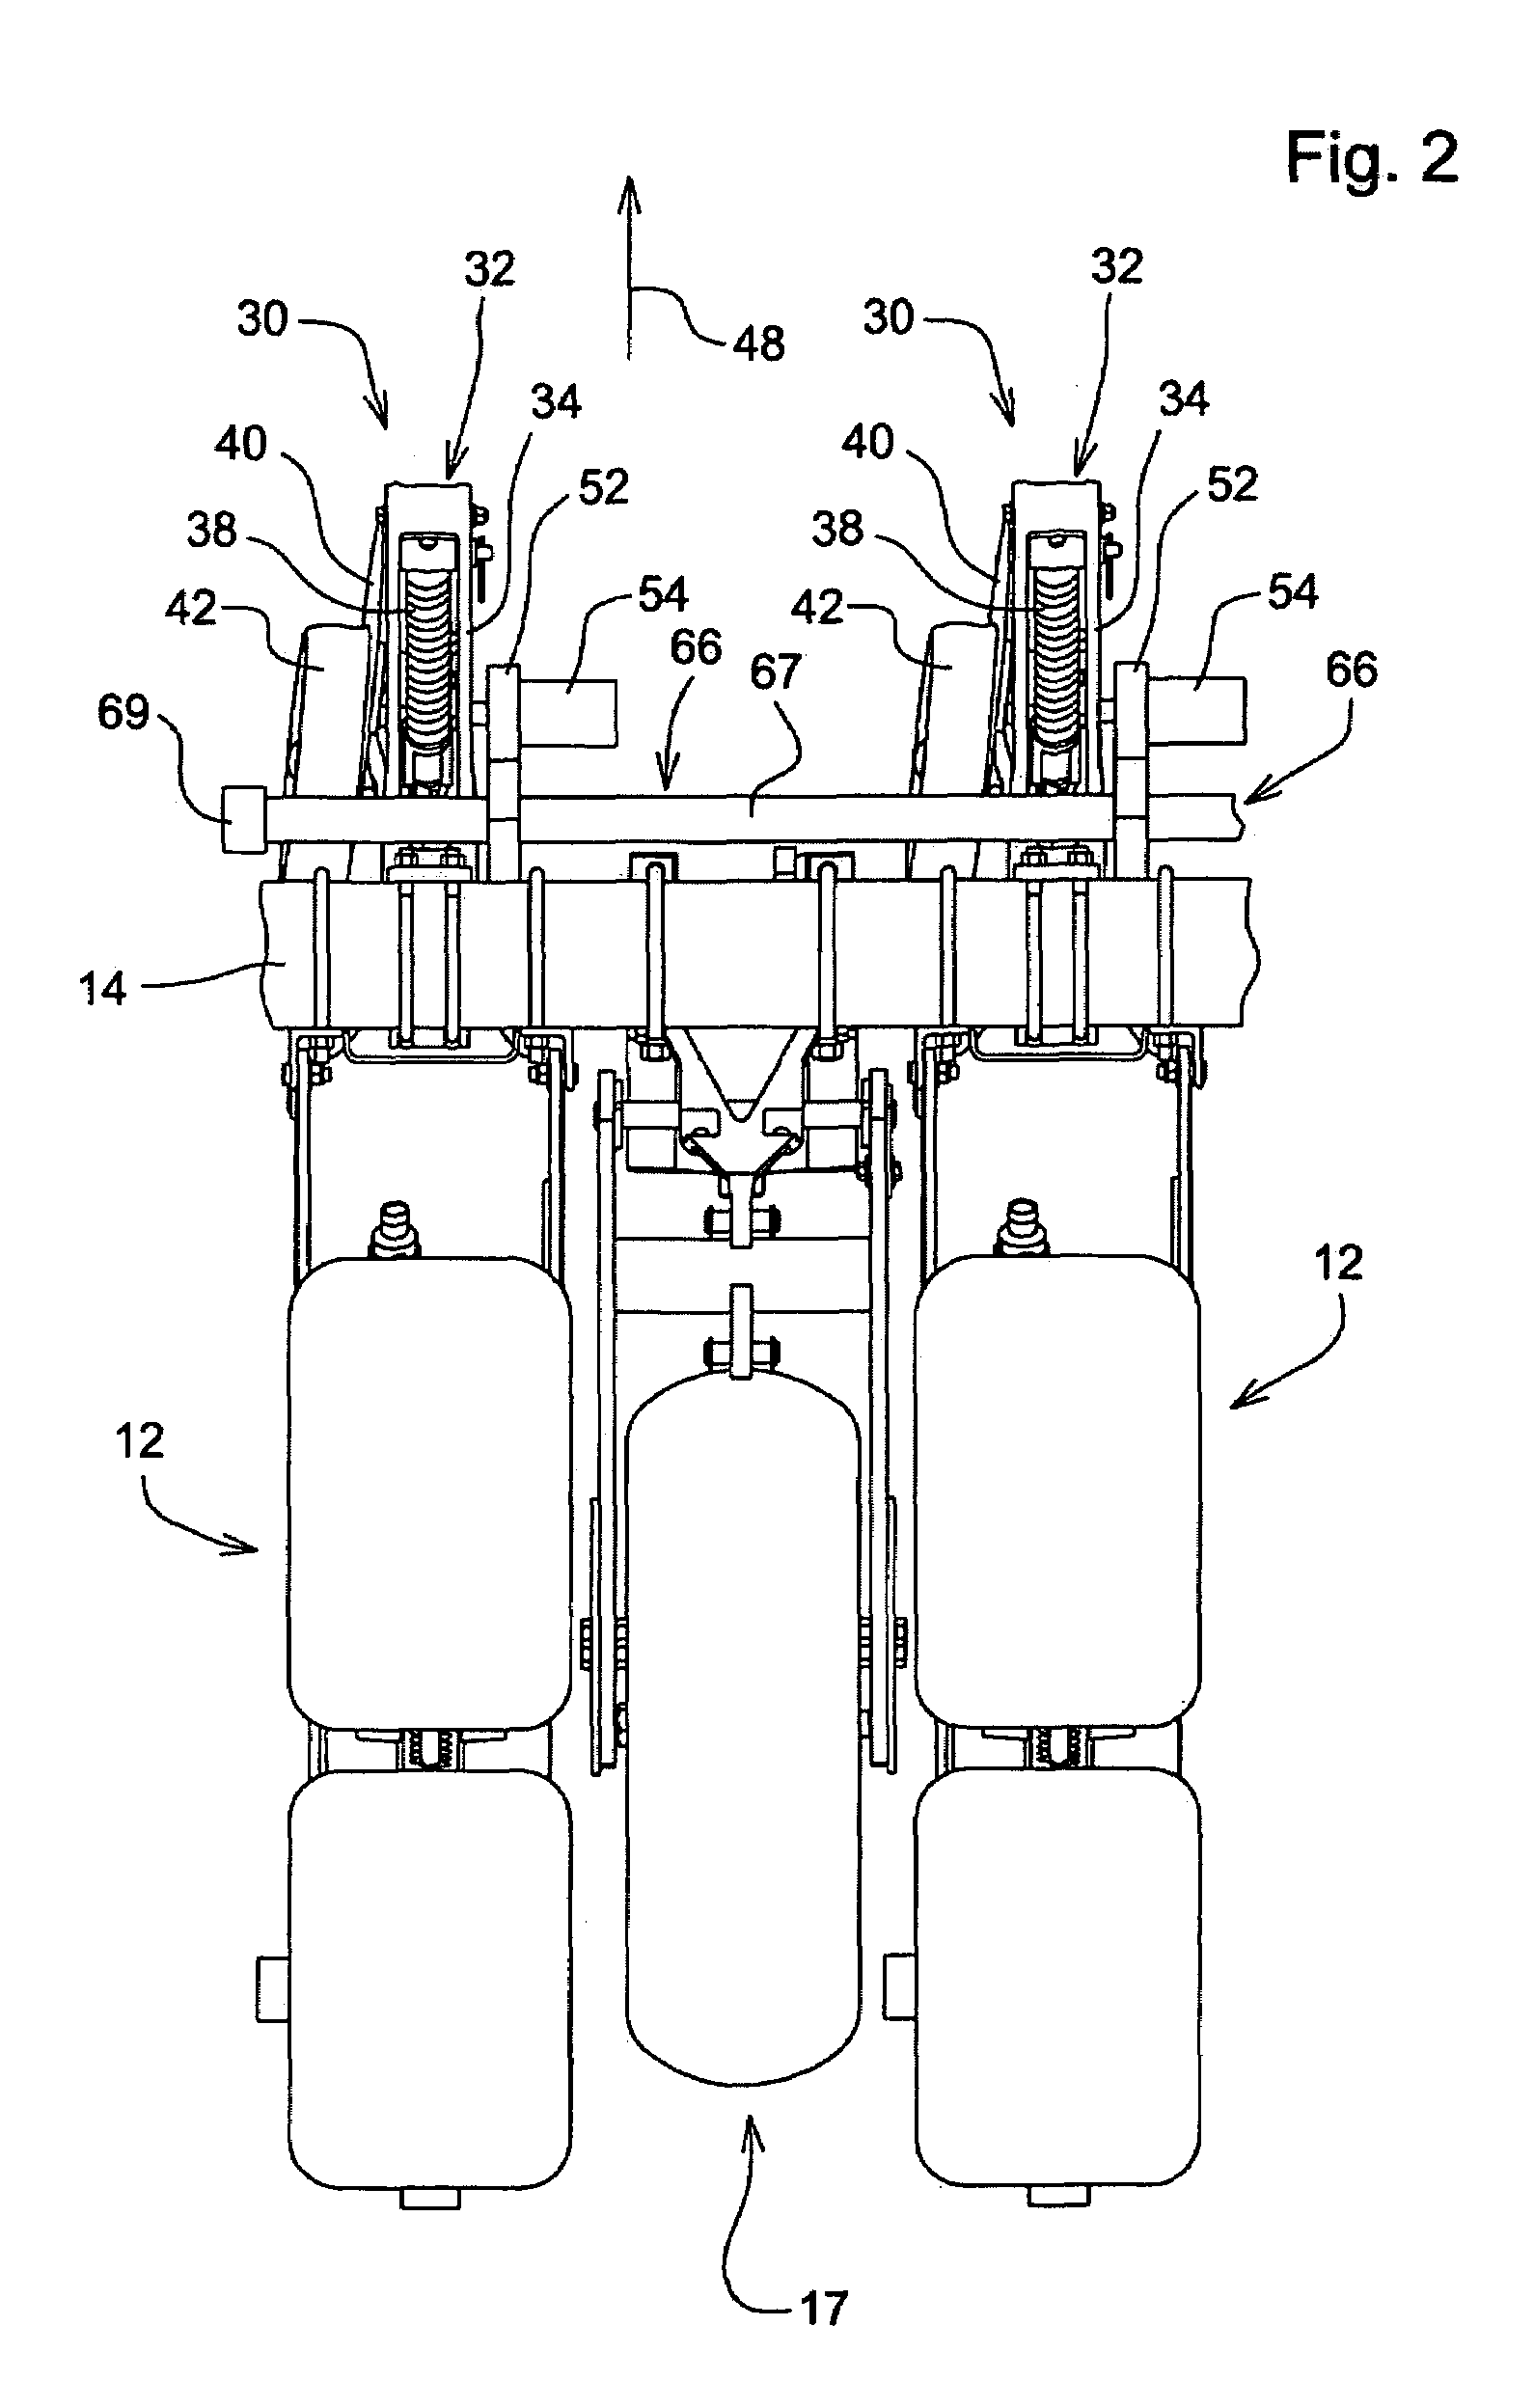 Modular liquid metering system for an agricultural implement